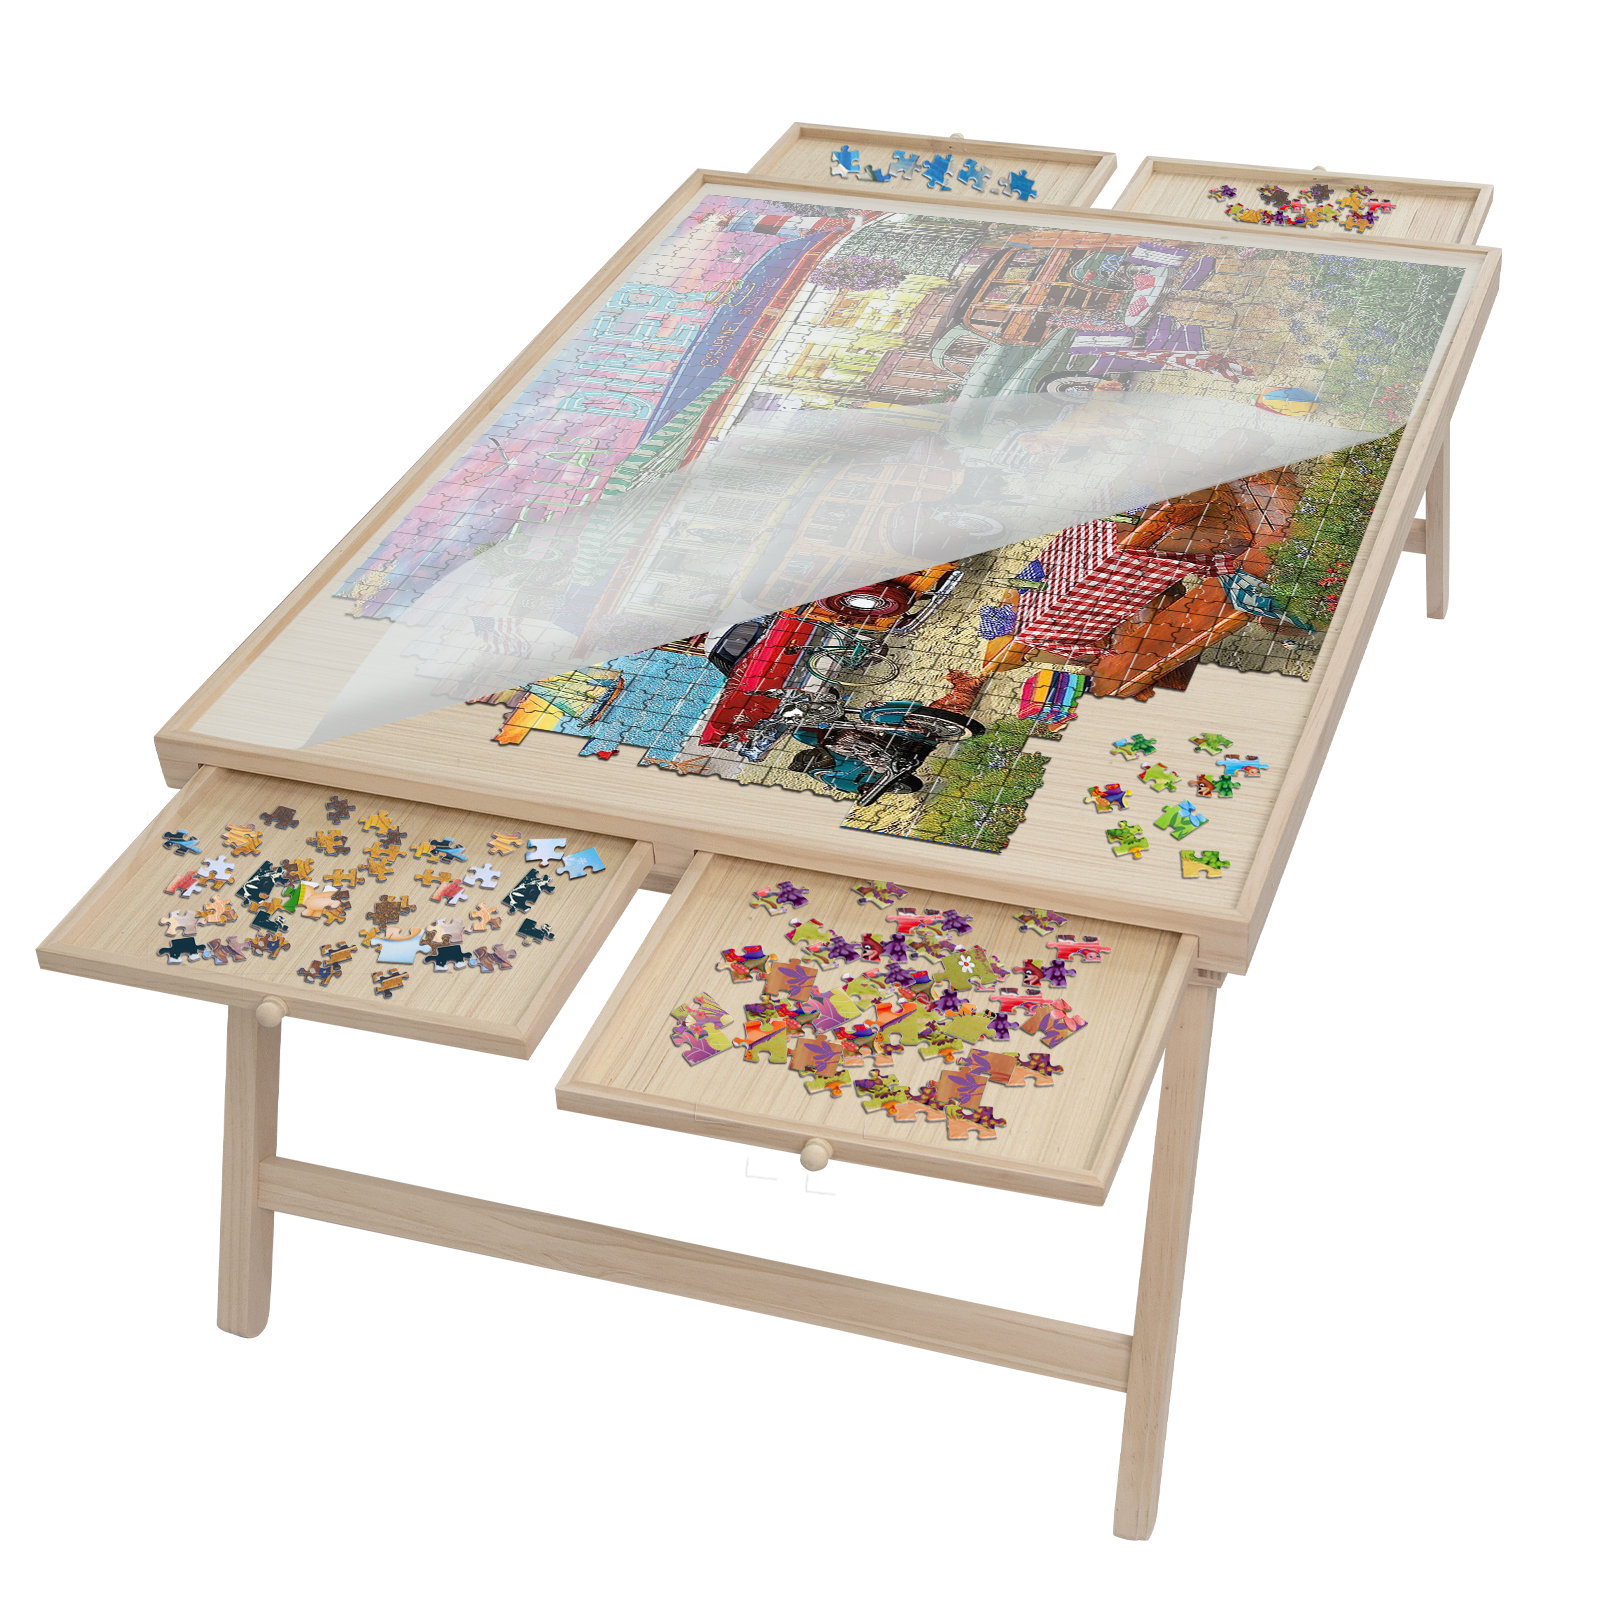 1000 Piece Wooden Jigsaw Puzzle Board - 4 Drawers, Rotating Puzzle Table |  30” X 22” Jigsaw Puzzle Table | Puzzle Cover Included - Portable Puzzle